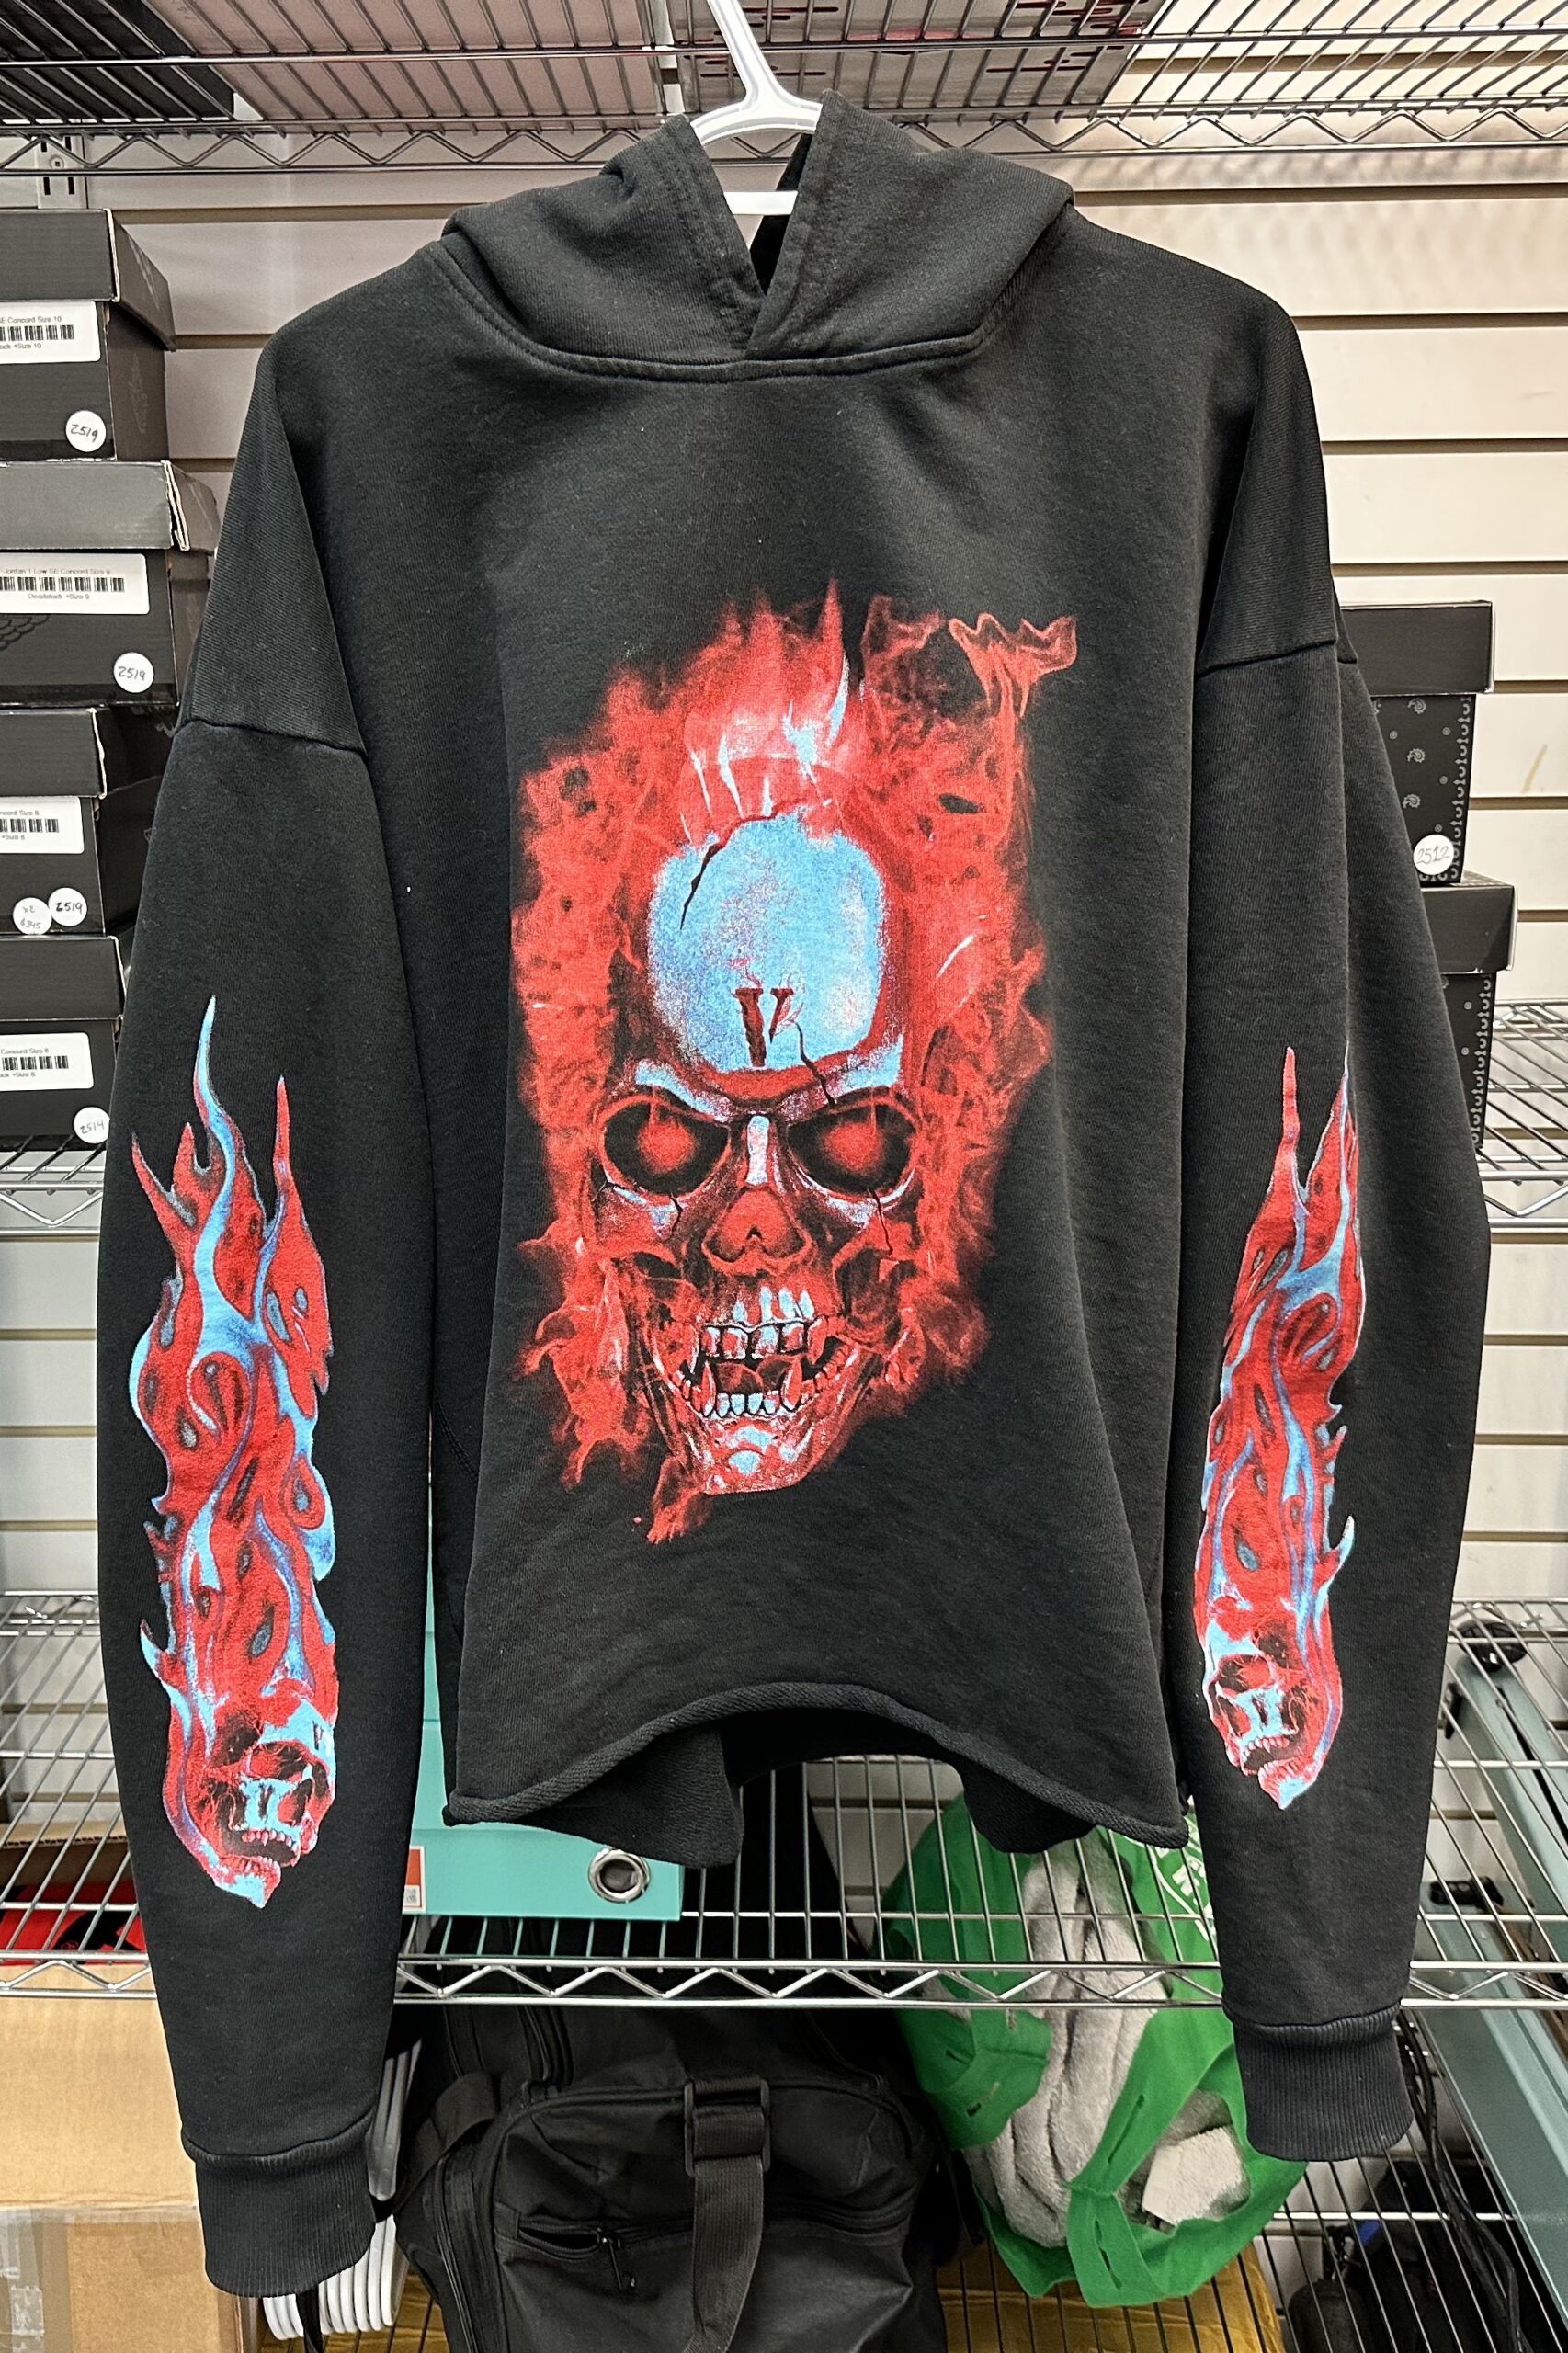 Preowned Vlone Skully Red Flame Hoodie Black Size M